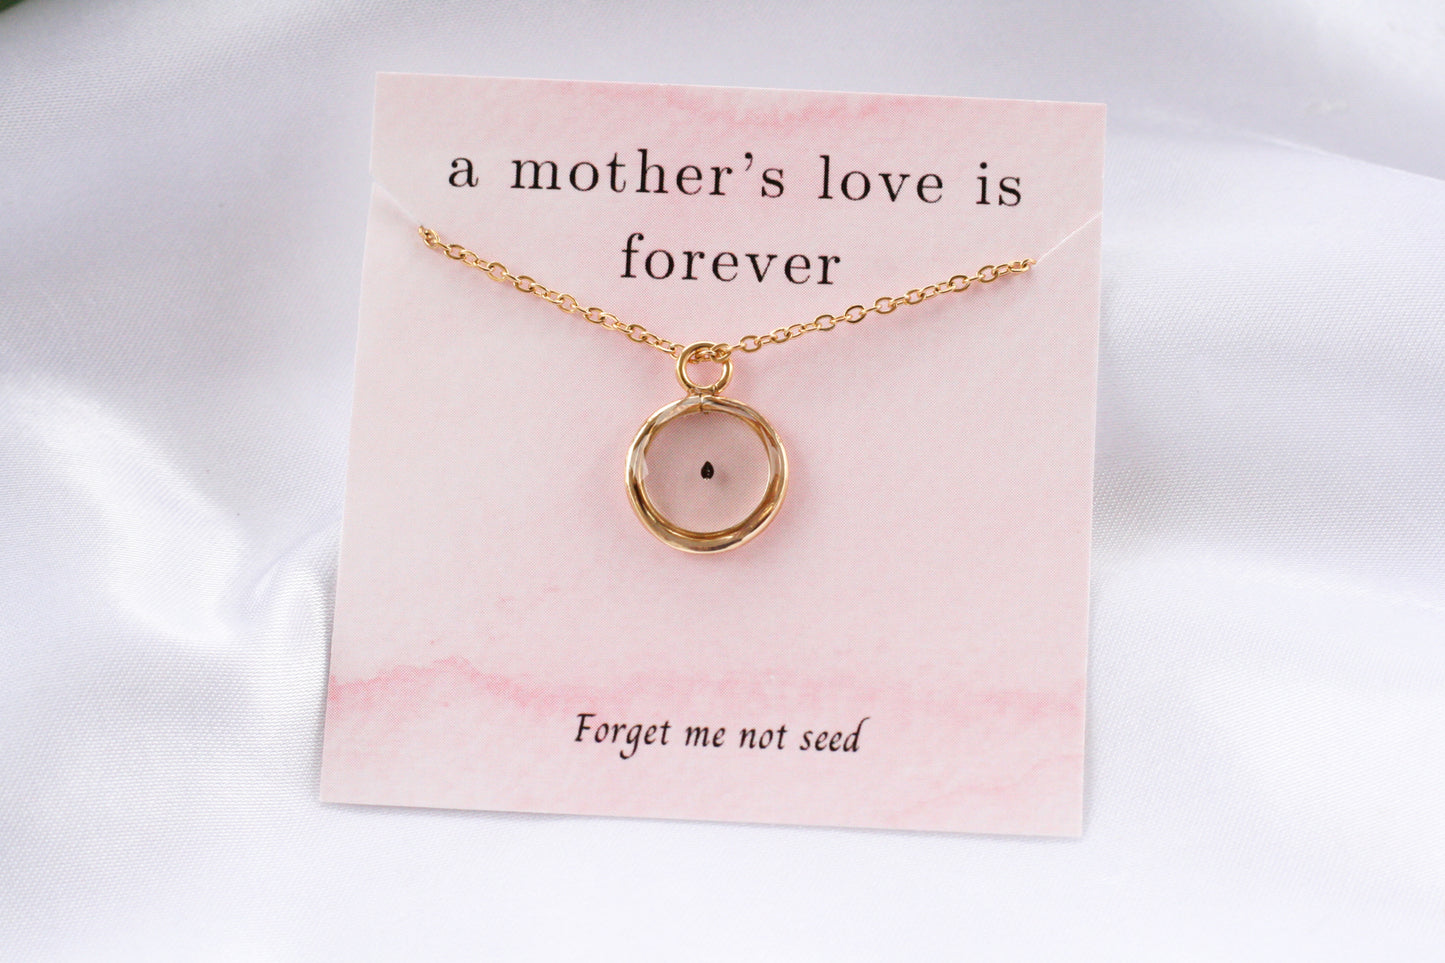 Forget me not seed necklace